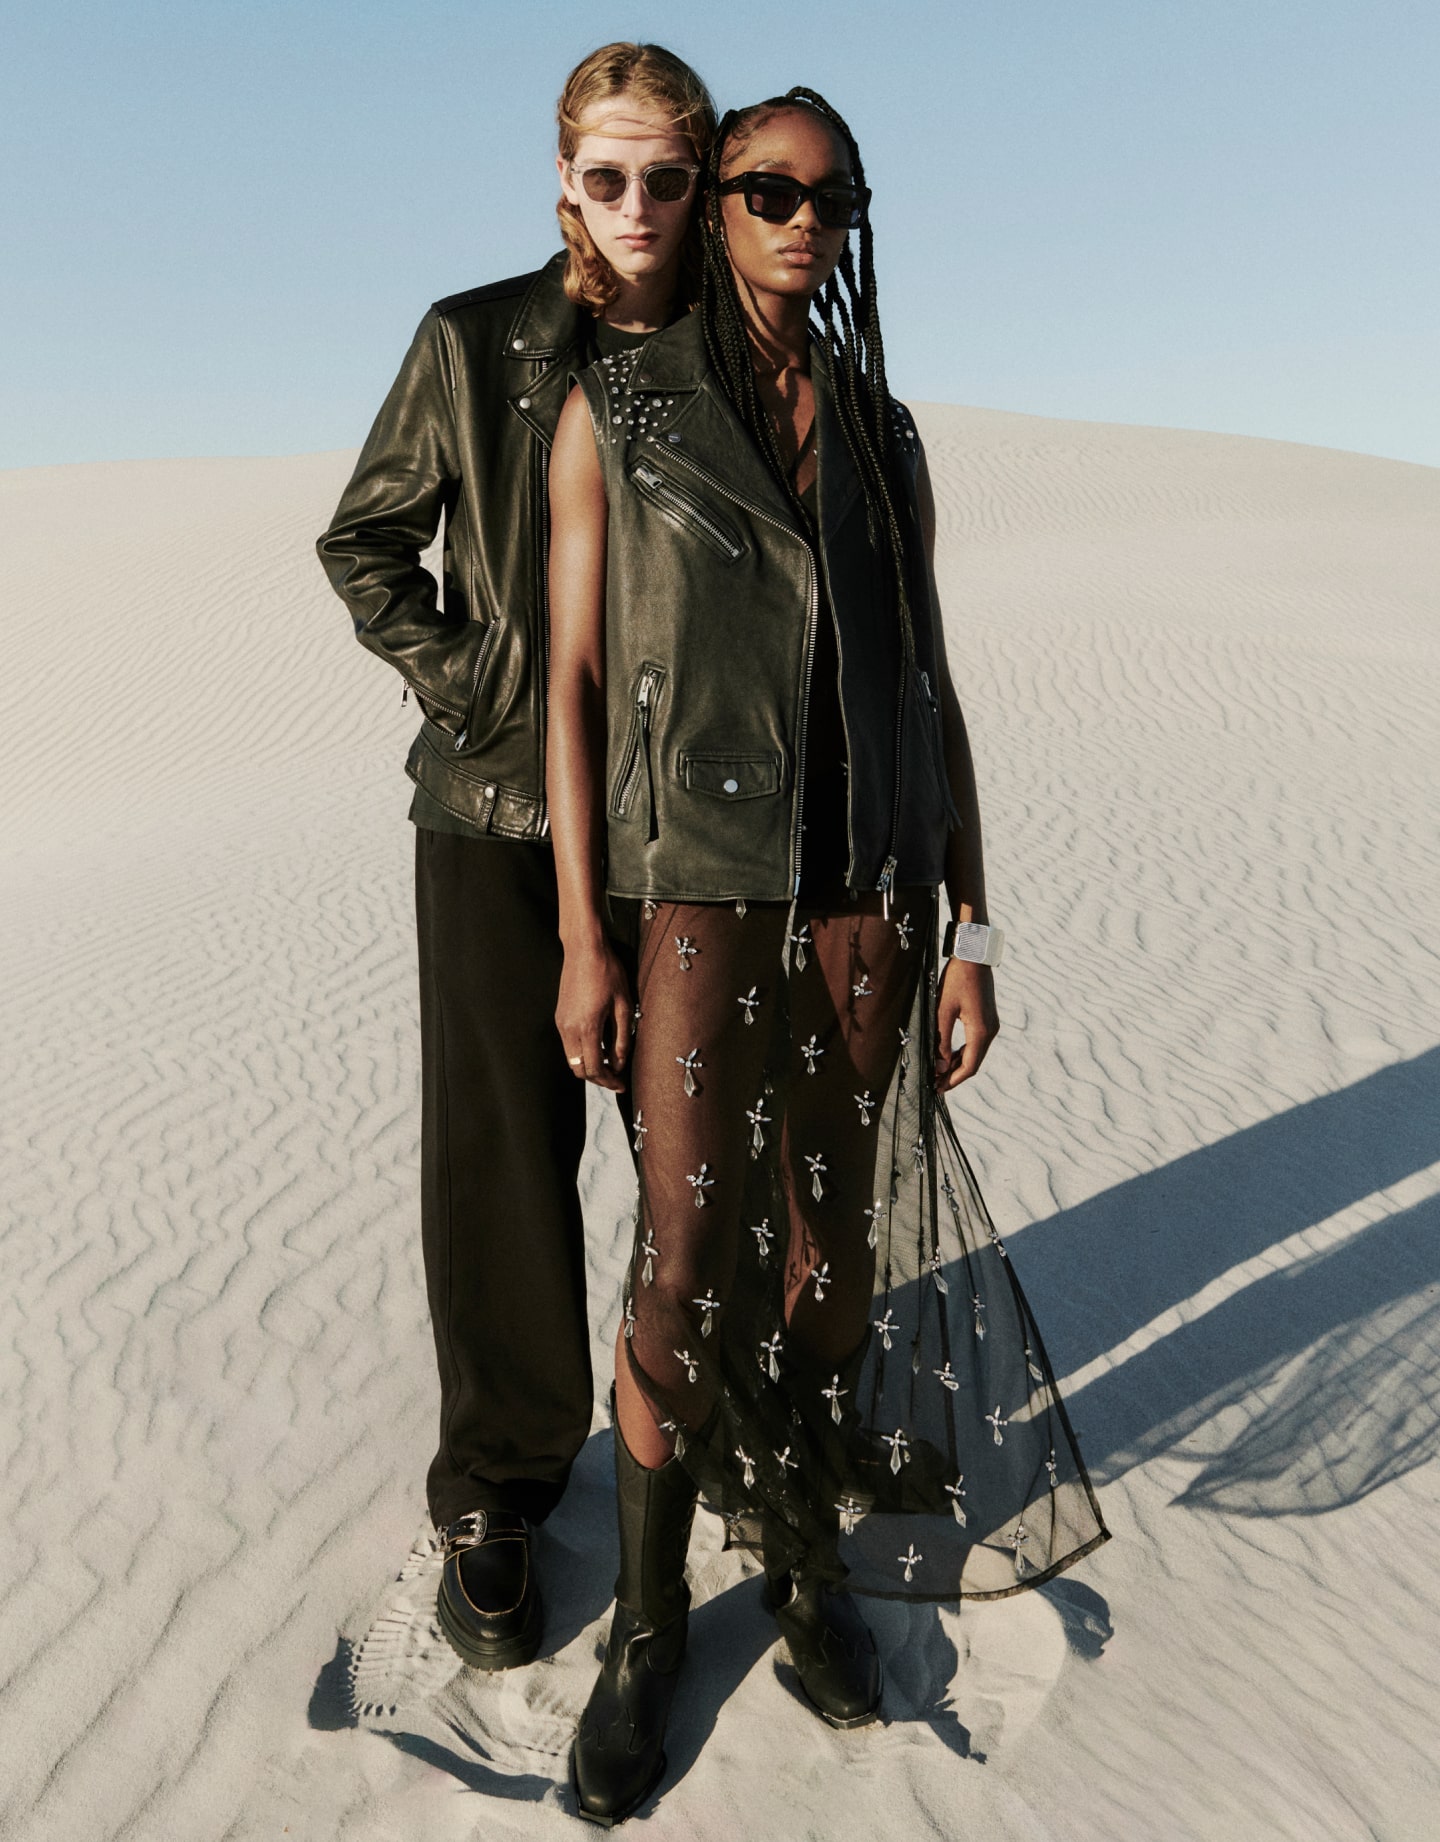 A woman wearing a sleeveless black leather jacket and black sunglasses standing in front of a man wearing transparent sunglasses and a black leather jacket standing in the desert.